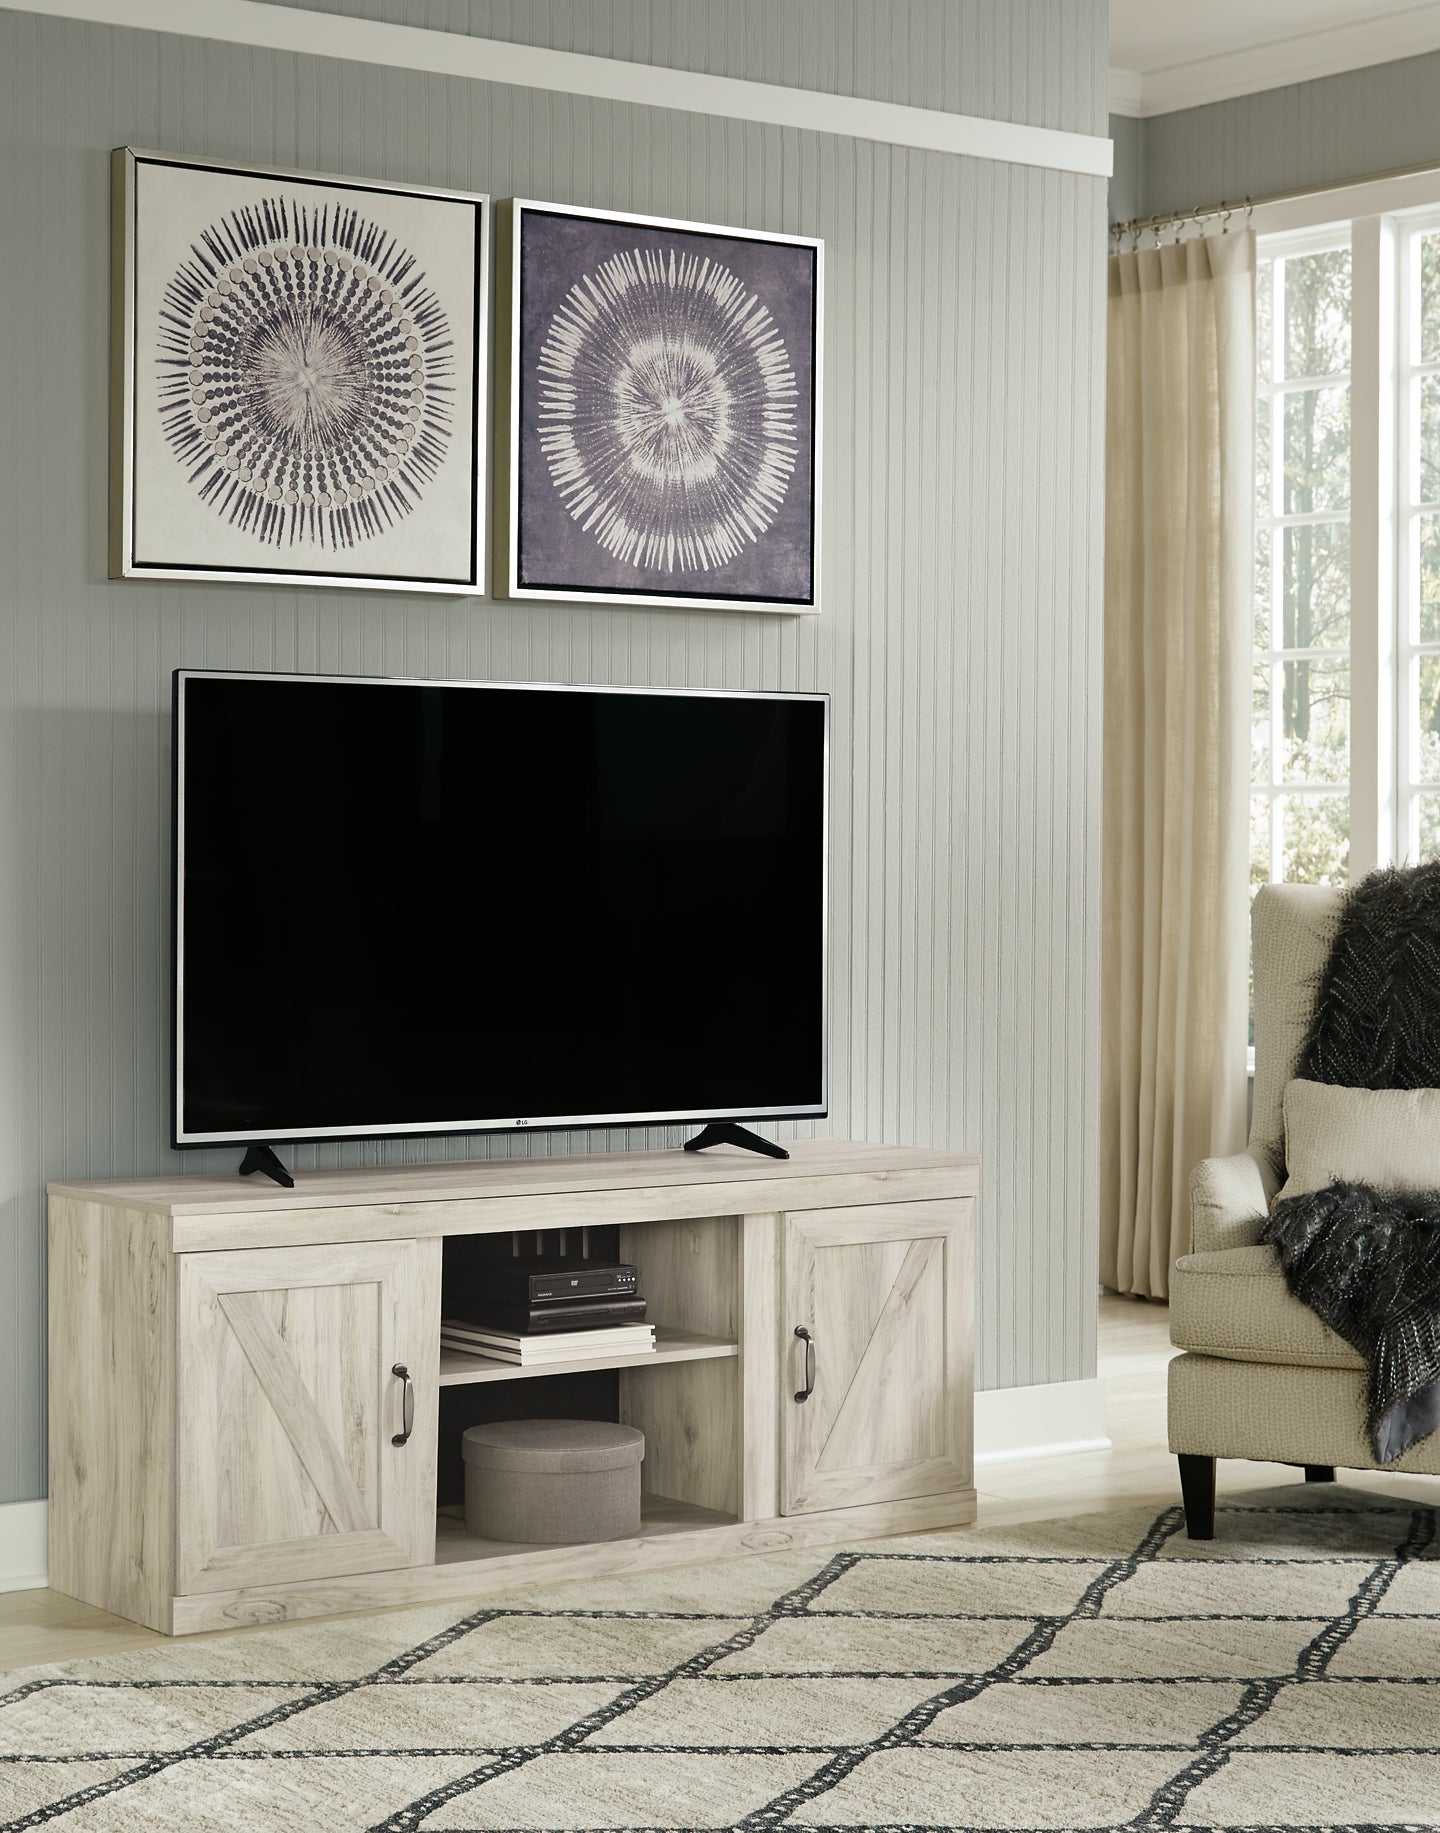 Ashley Express - Bellaby LG TV Stand w/Fireplace Option Wilson Furniture (OH)  in Bridgeport, Ohio. Serving Bridgeport, Yorkville, Bellaire, & Avondale